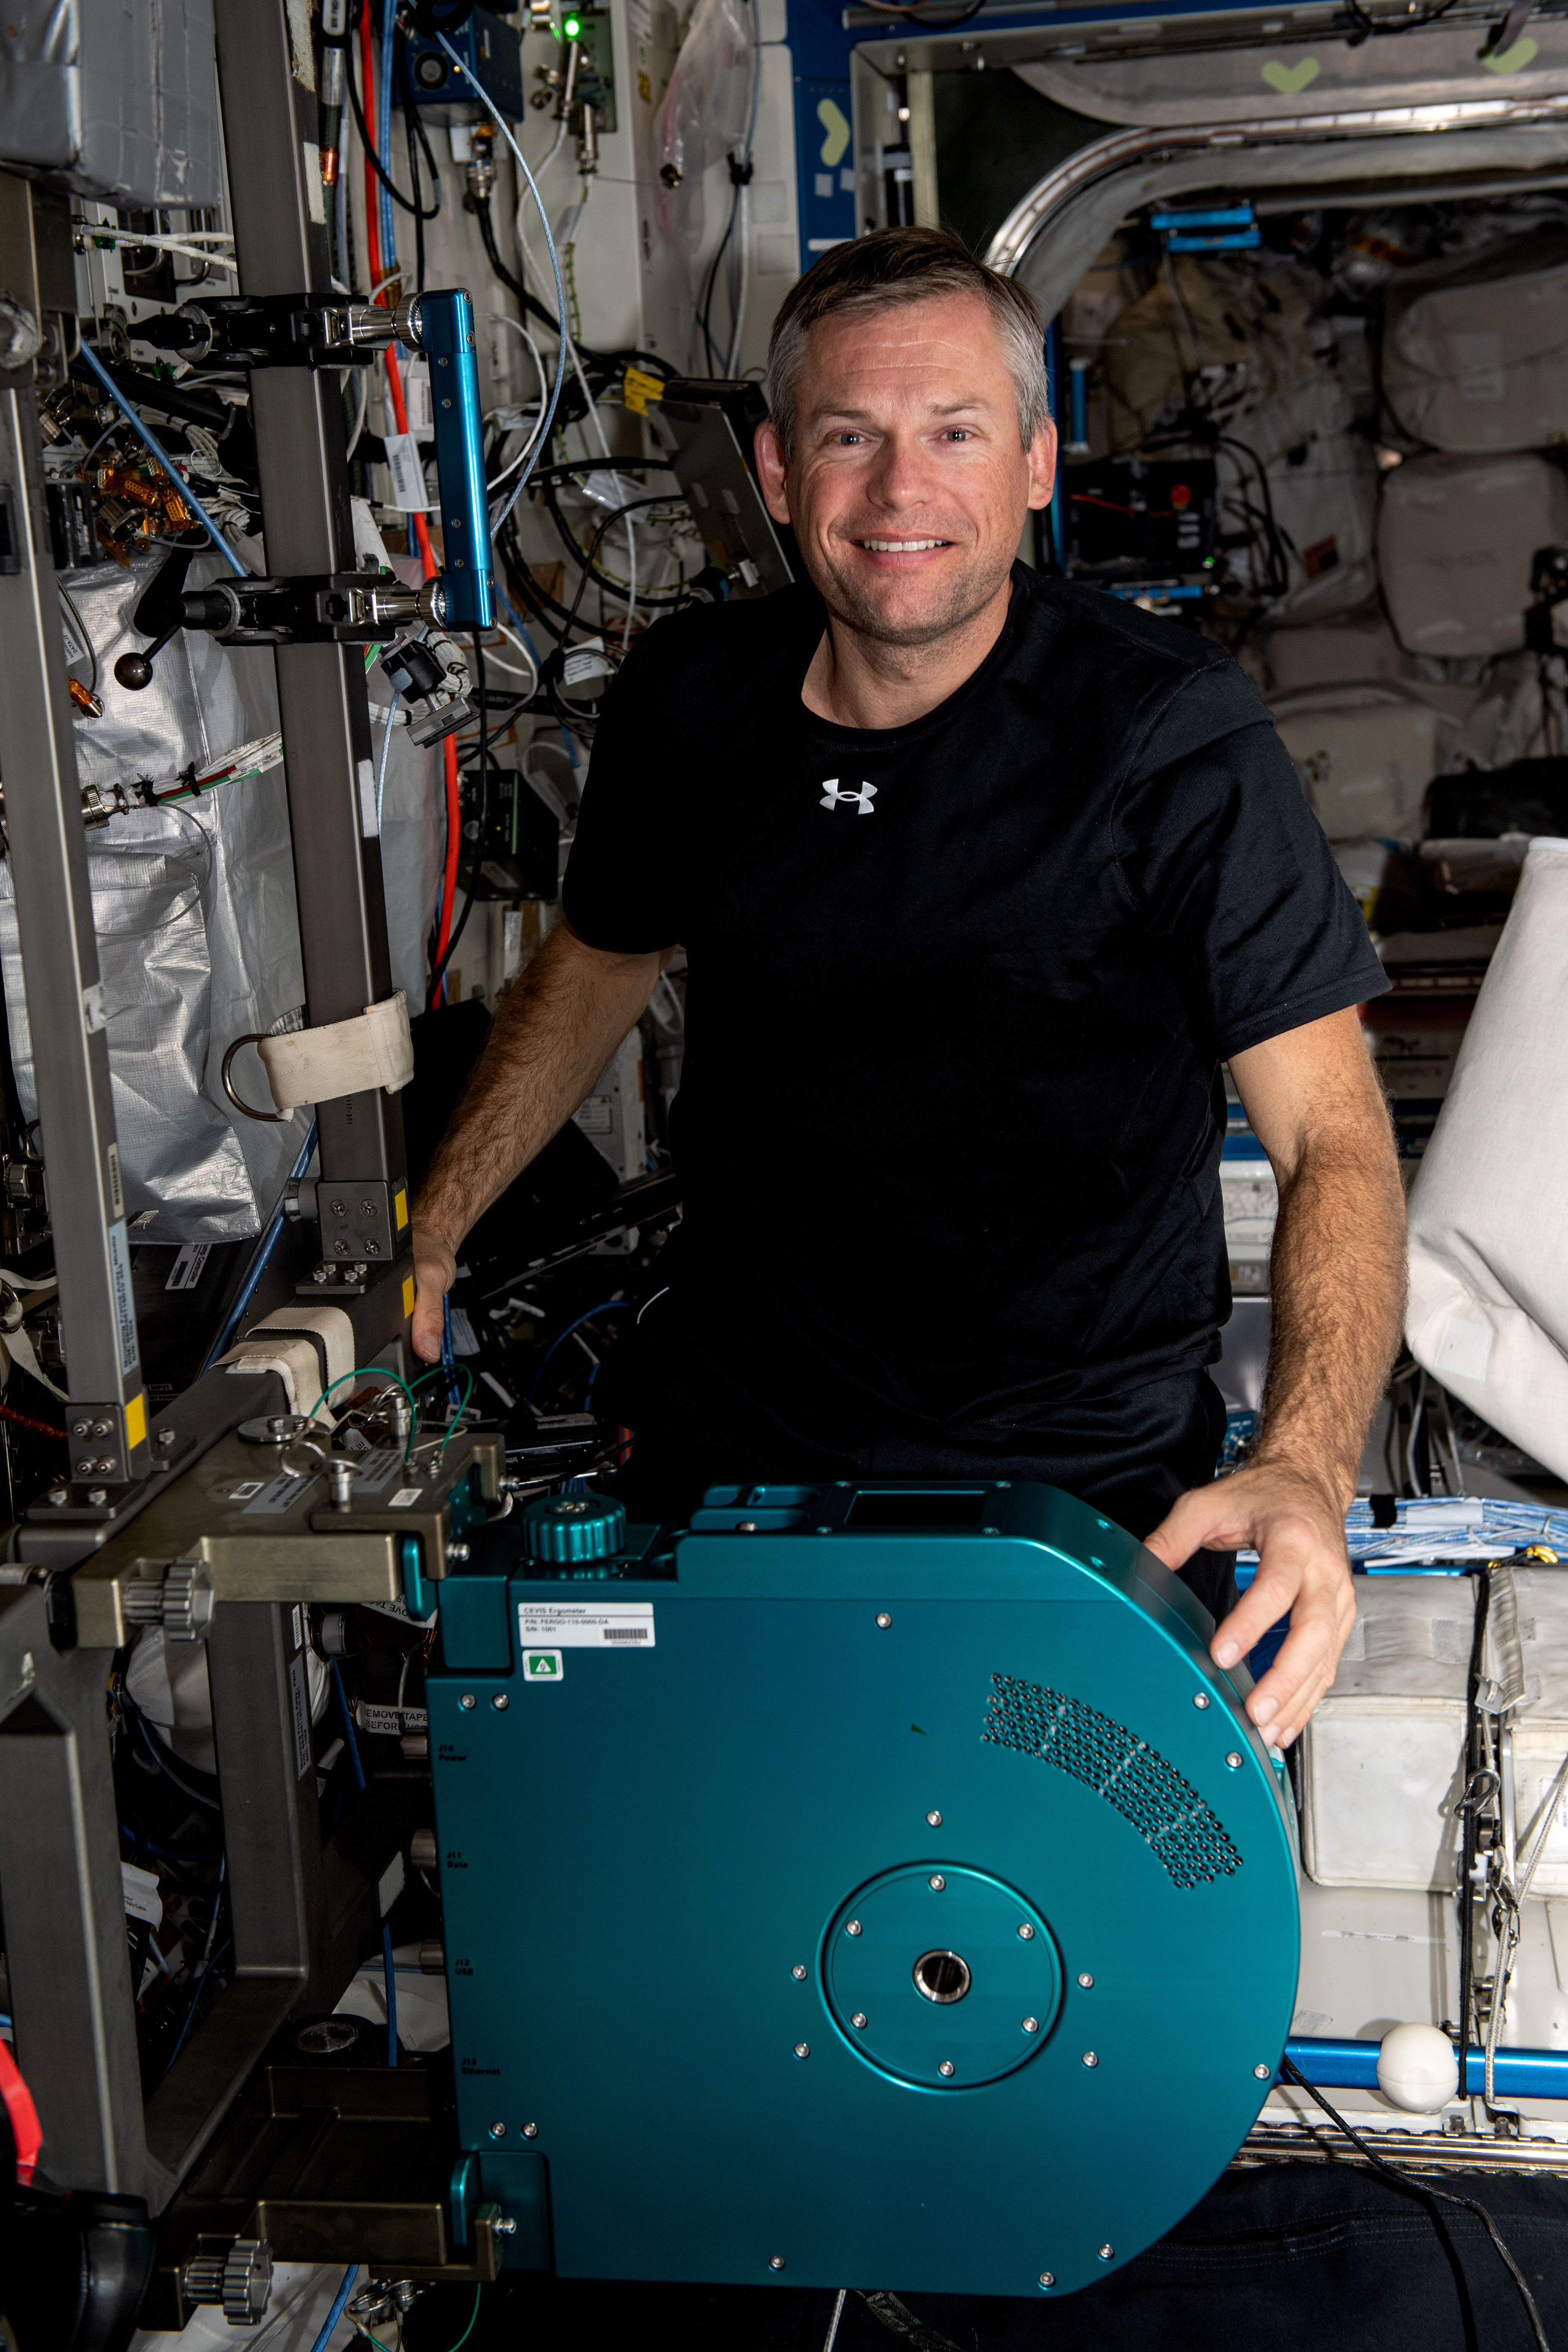 Astronaut Andreas Mogensen is pictured with a new exercise cycle